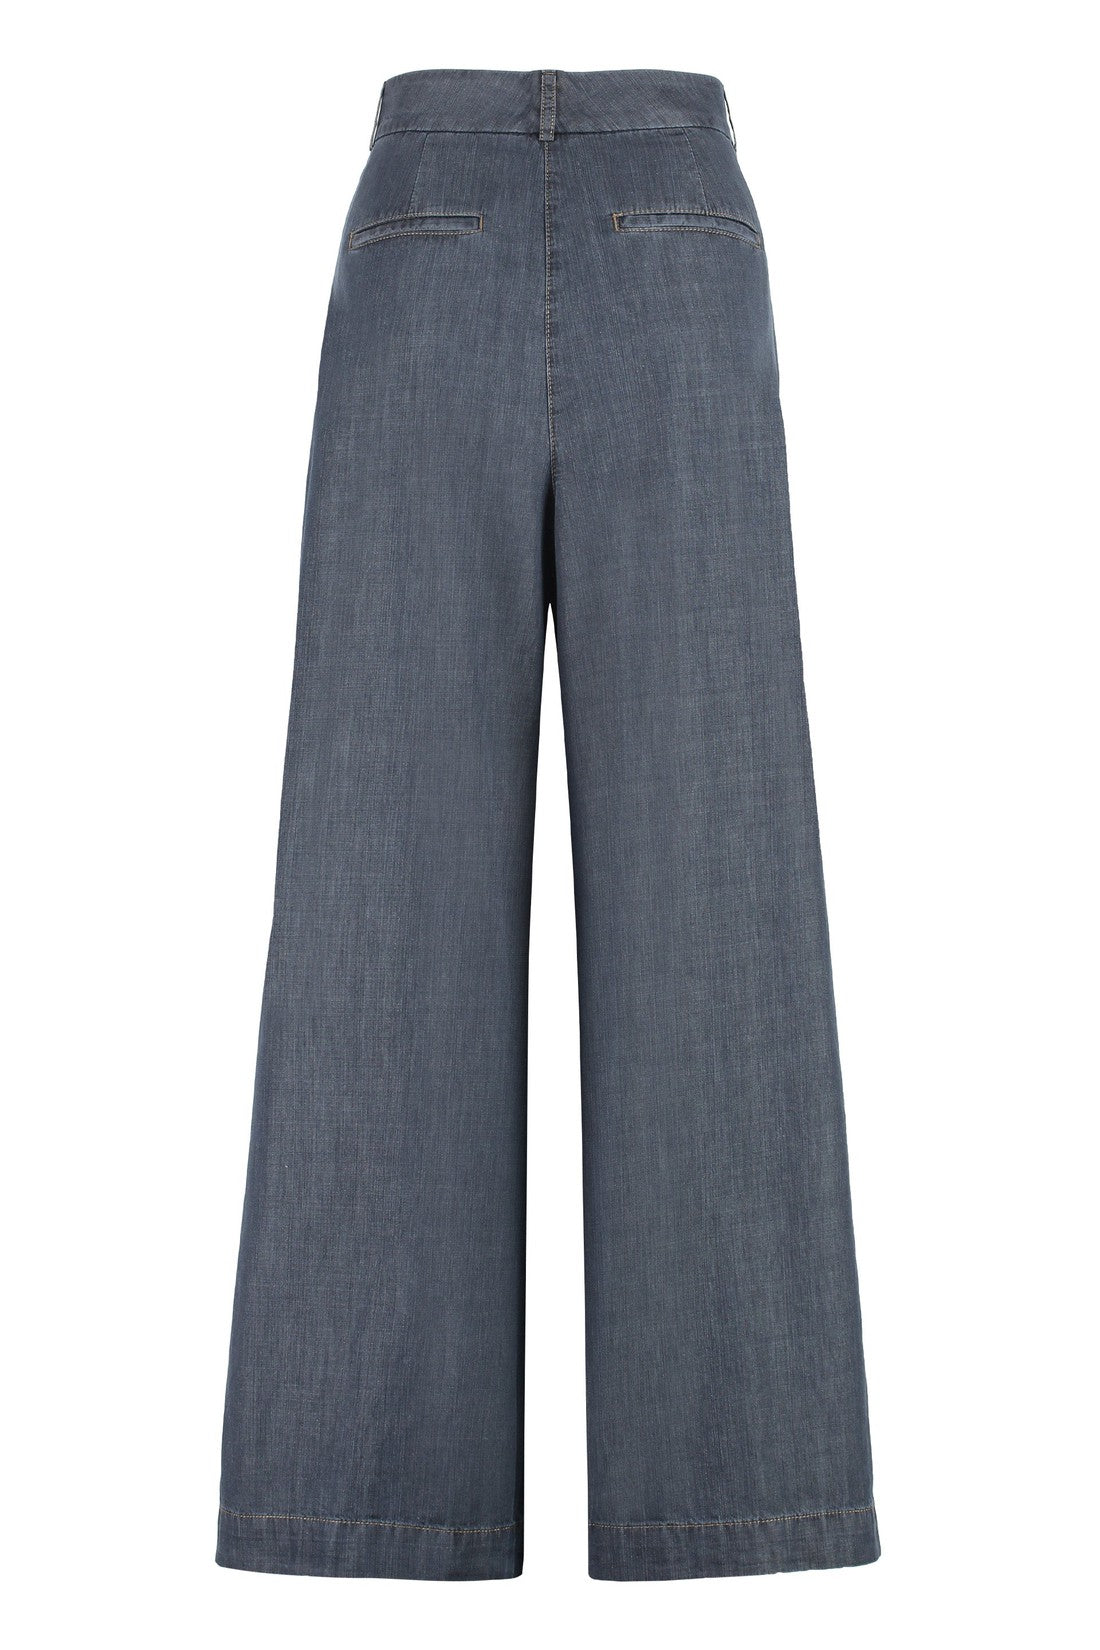 Peserico-OUTLET-SALE-Cotton baggy trousers-ARCHIVIST